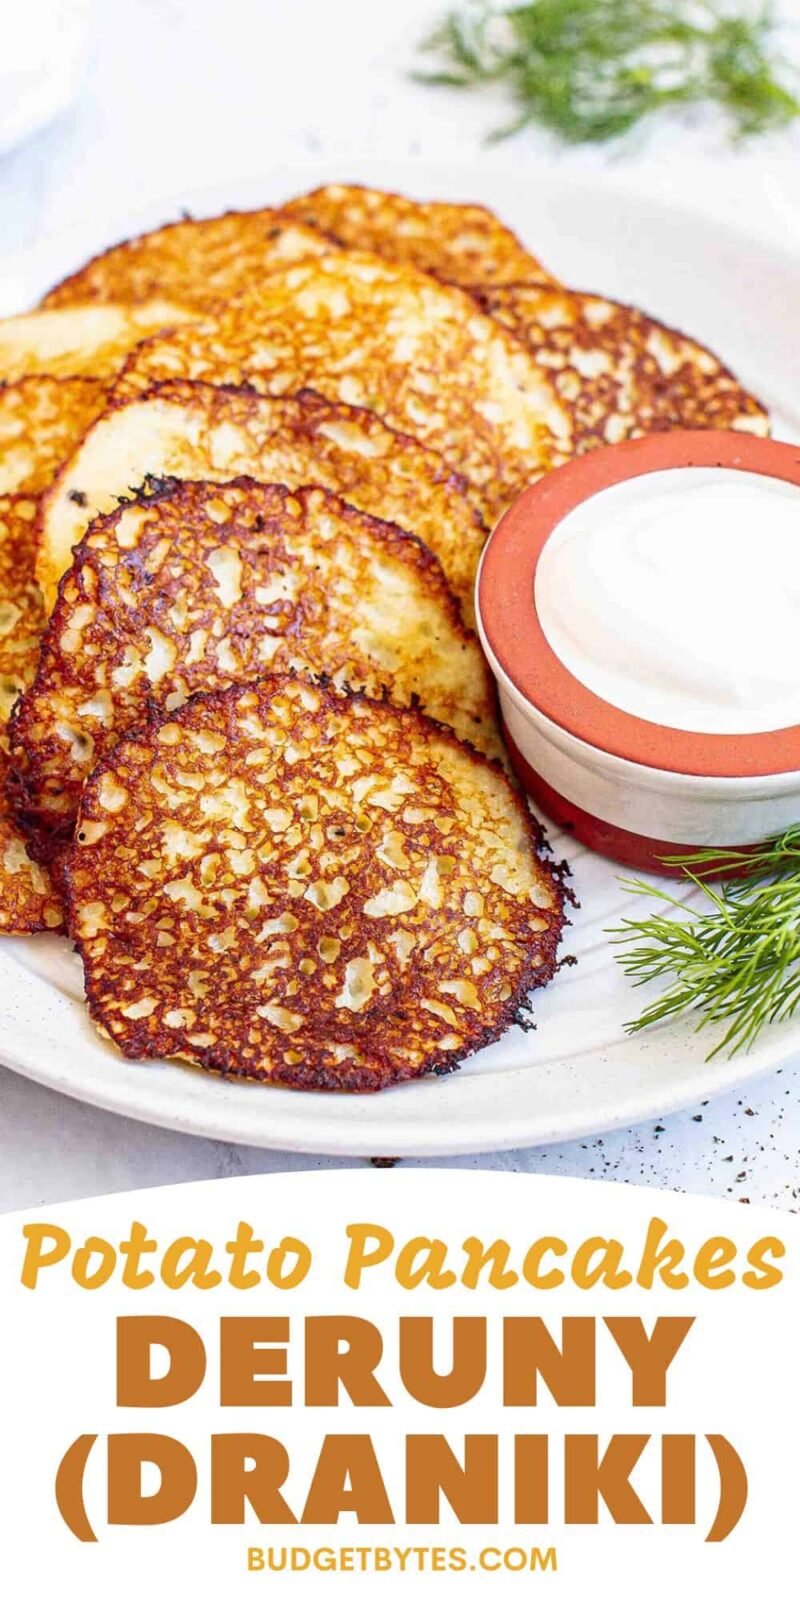 Side view of a plate of potato pancakes, title text at the bottom.